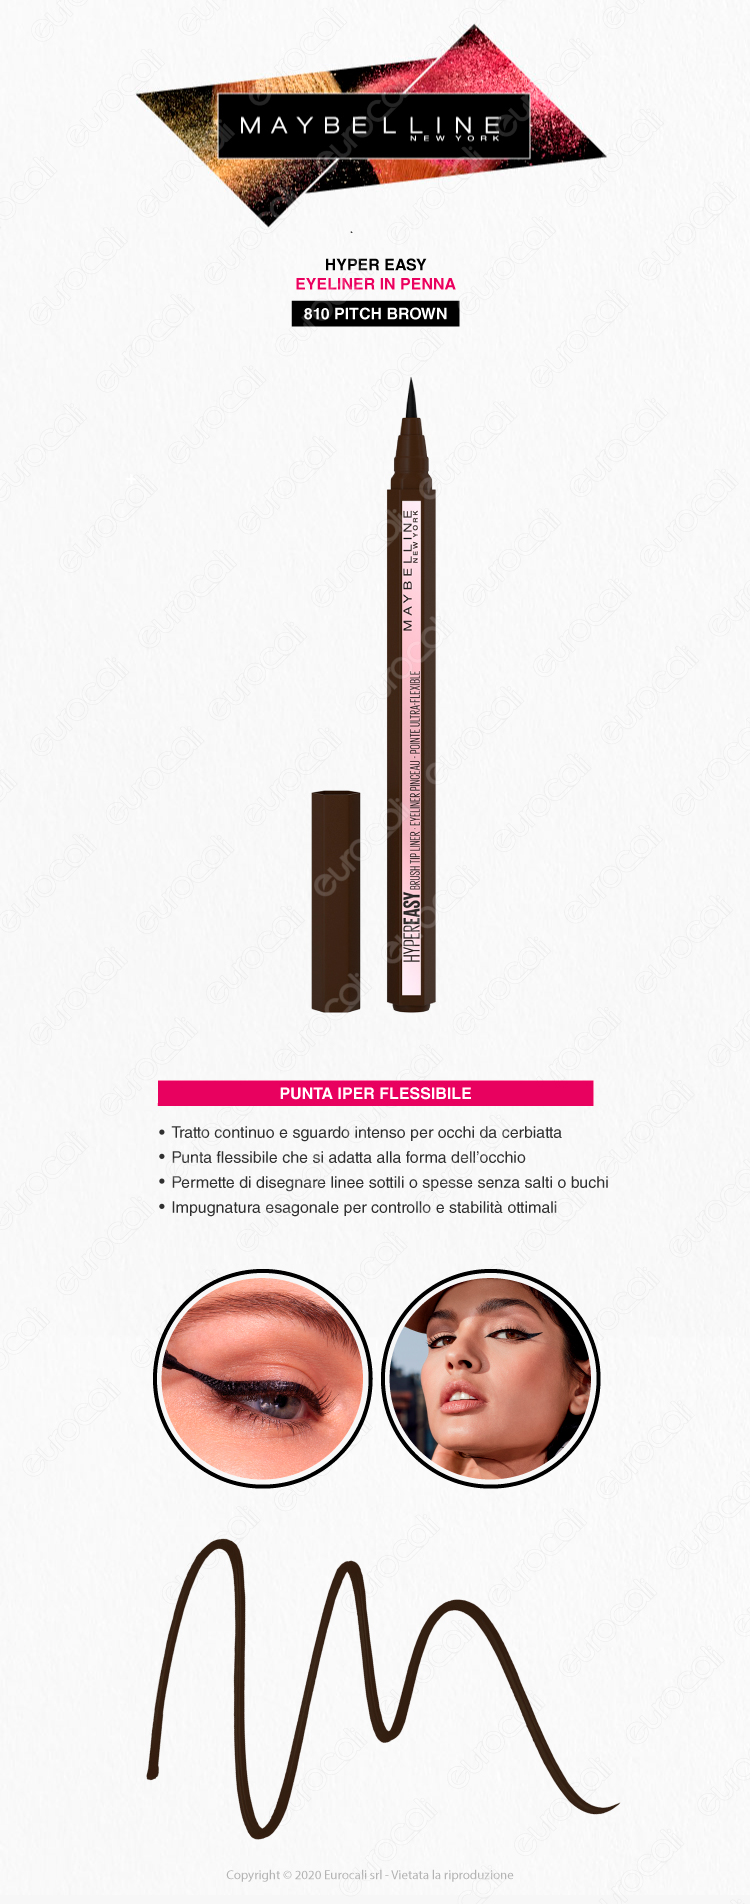 Maybelline New York eyeliner in penna hyper easy colore pitch brown